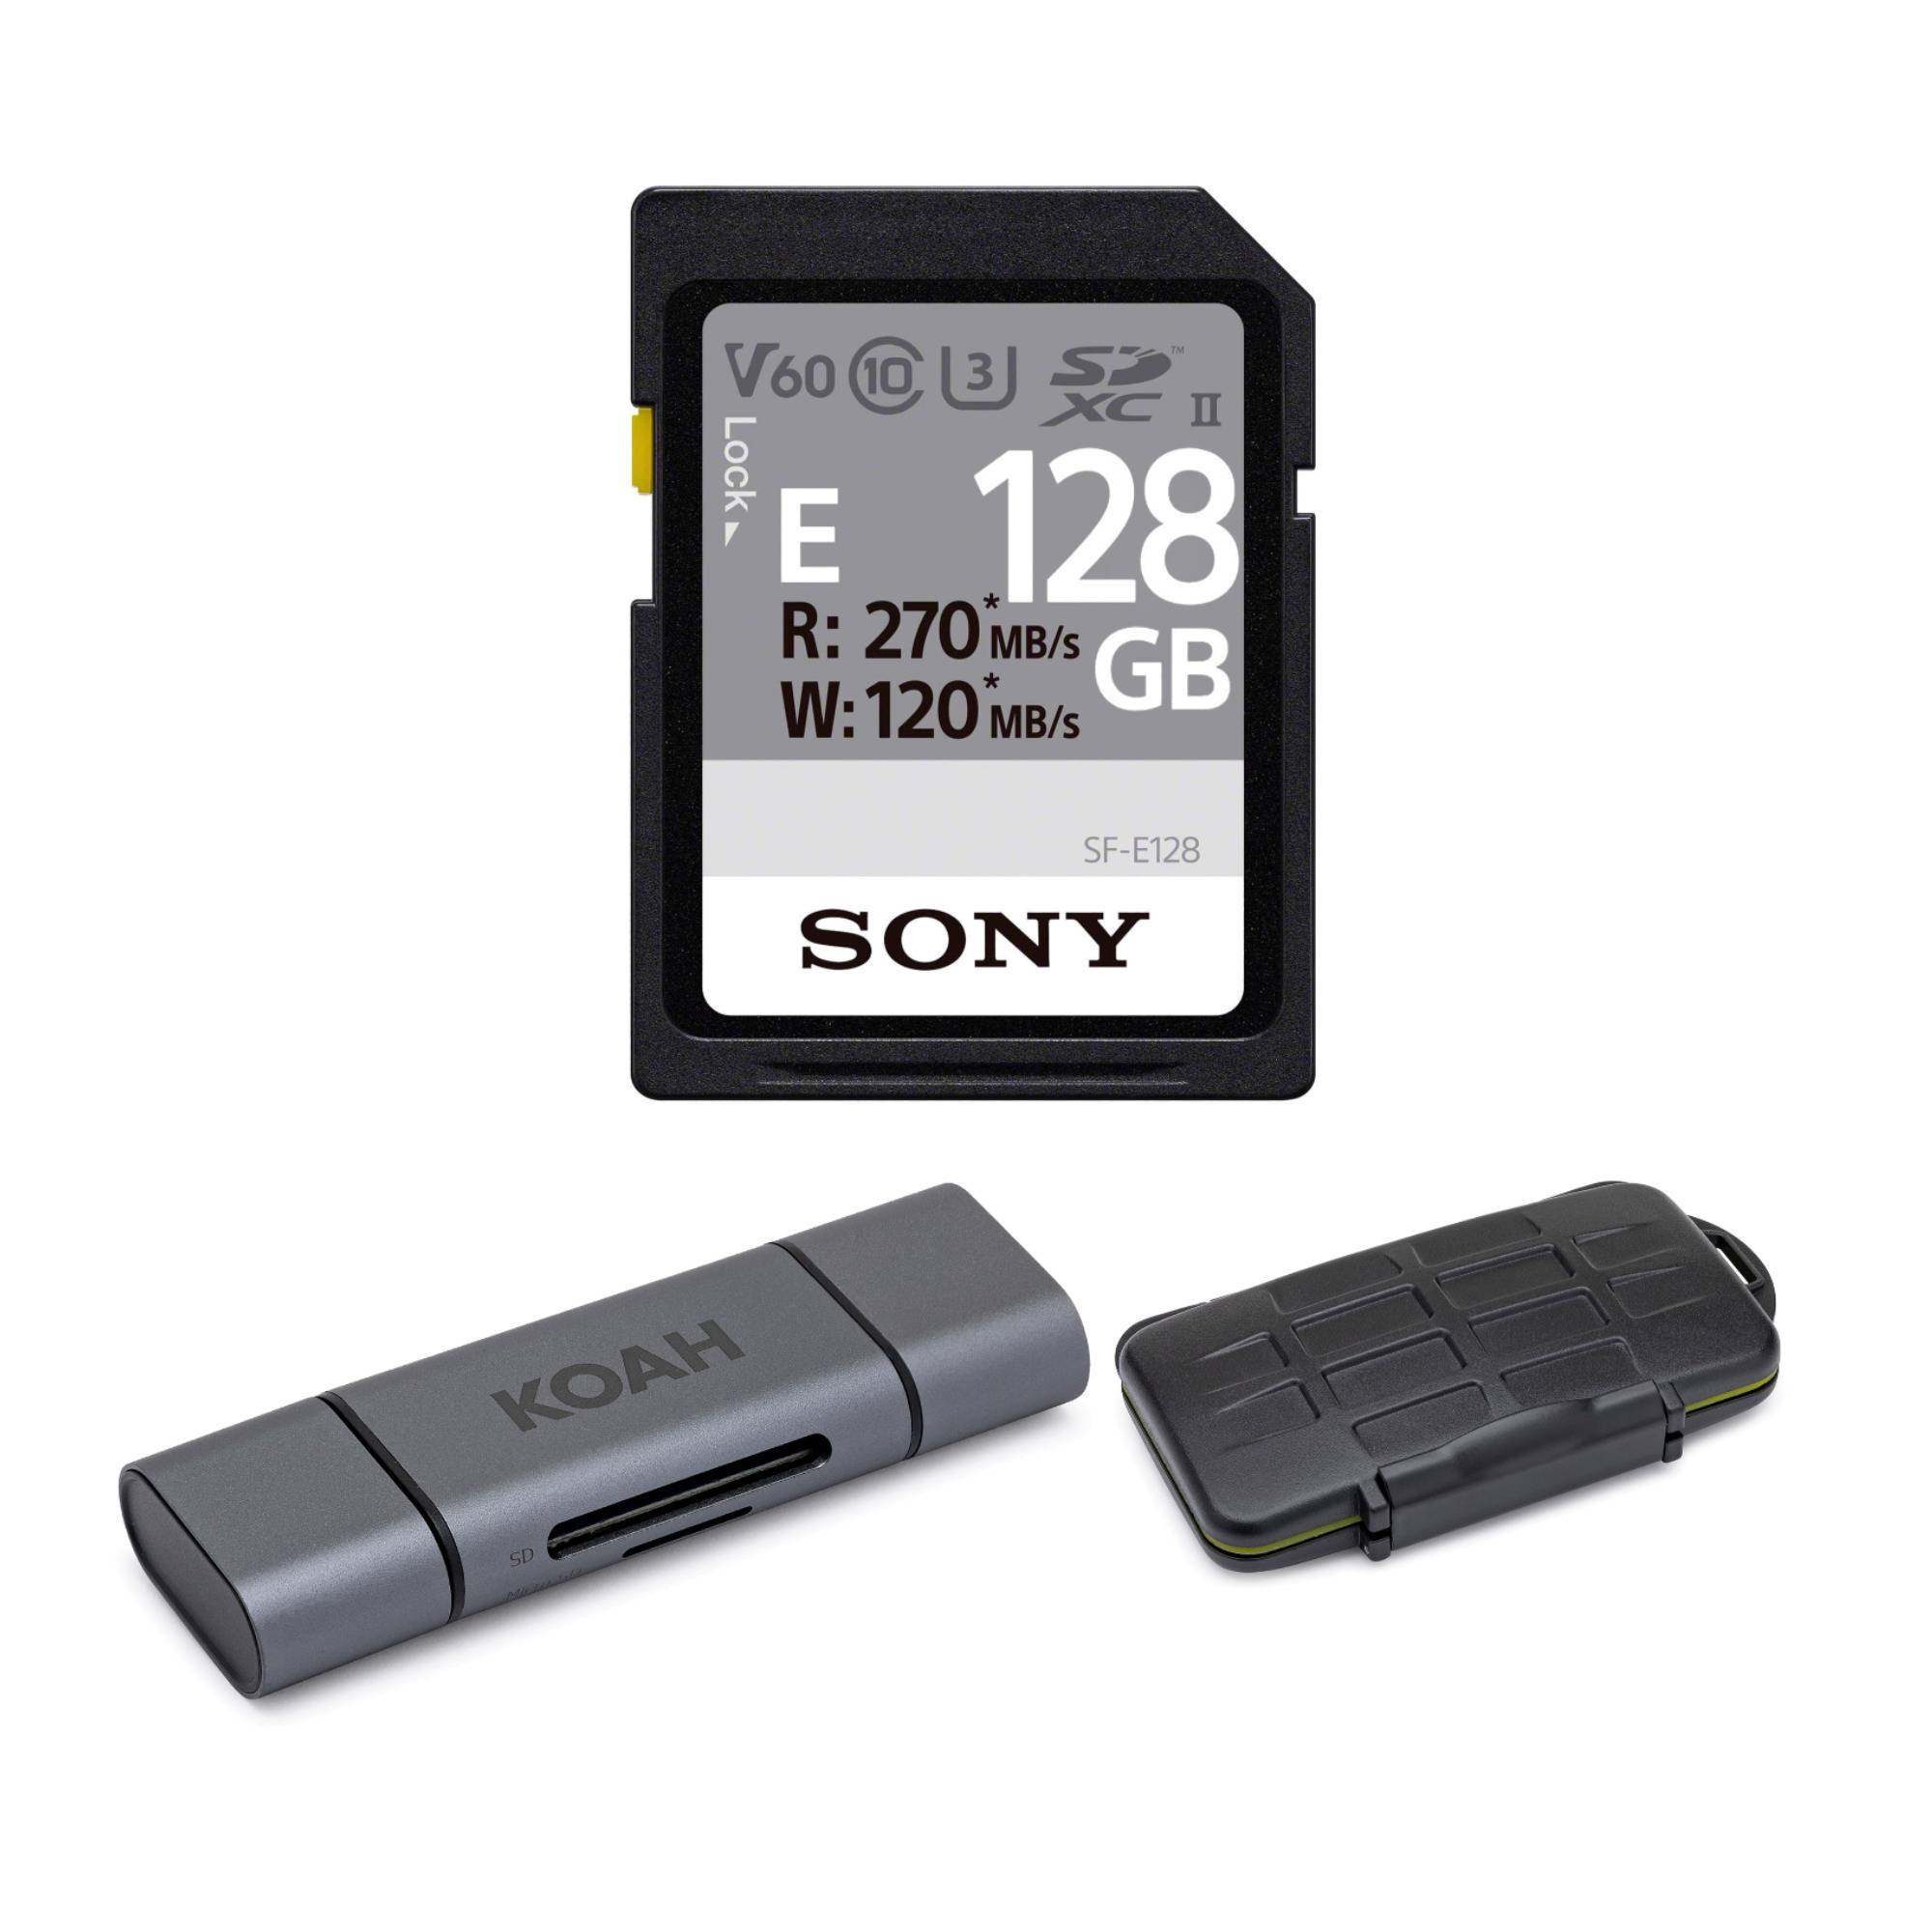 Sony 128GB E-Series High Speed SD Card Bundle with Storage Case, and Card Reader